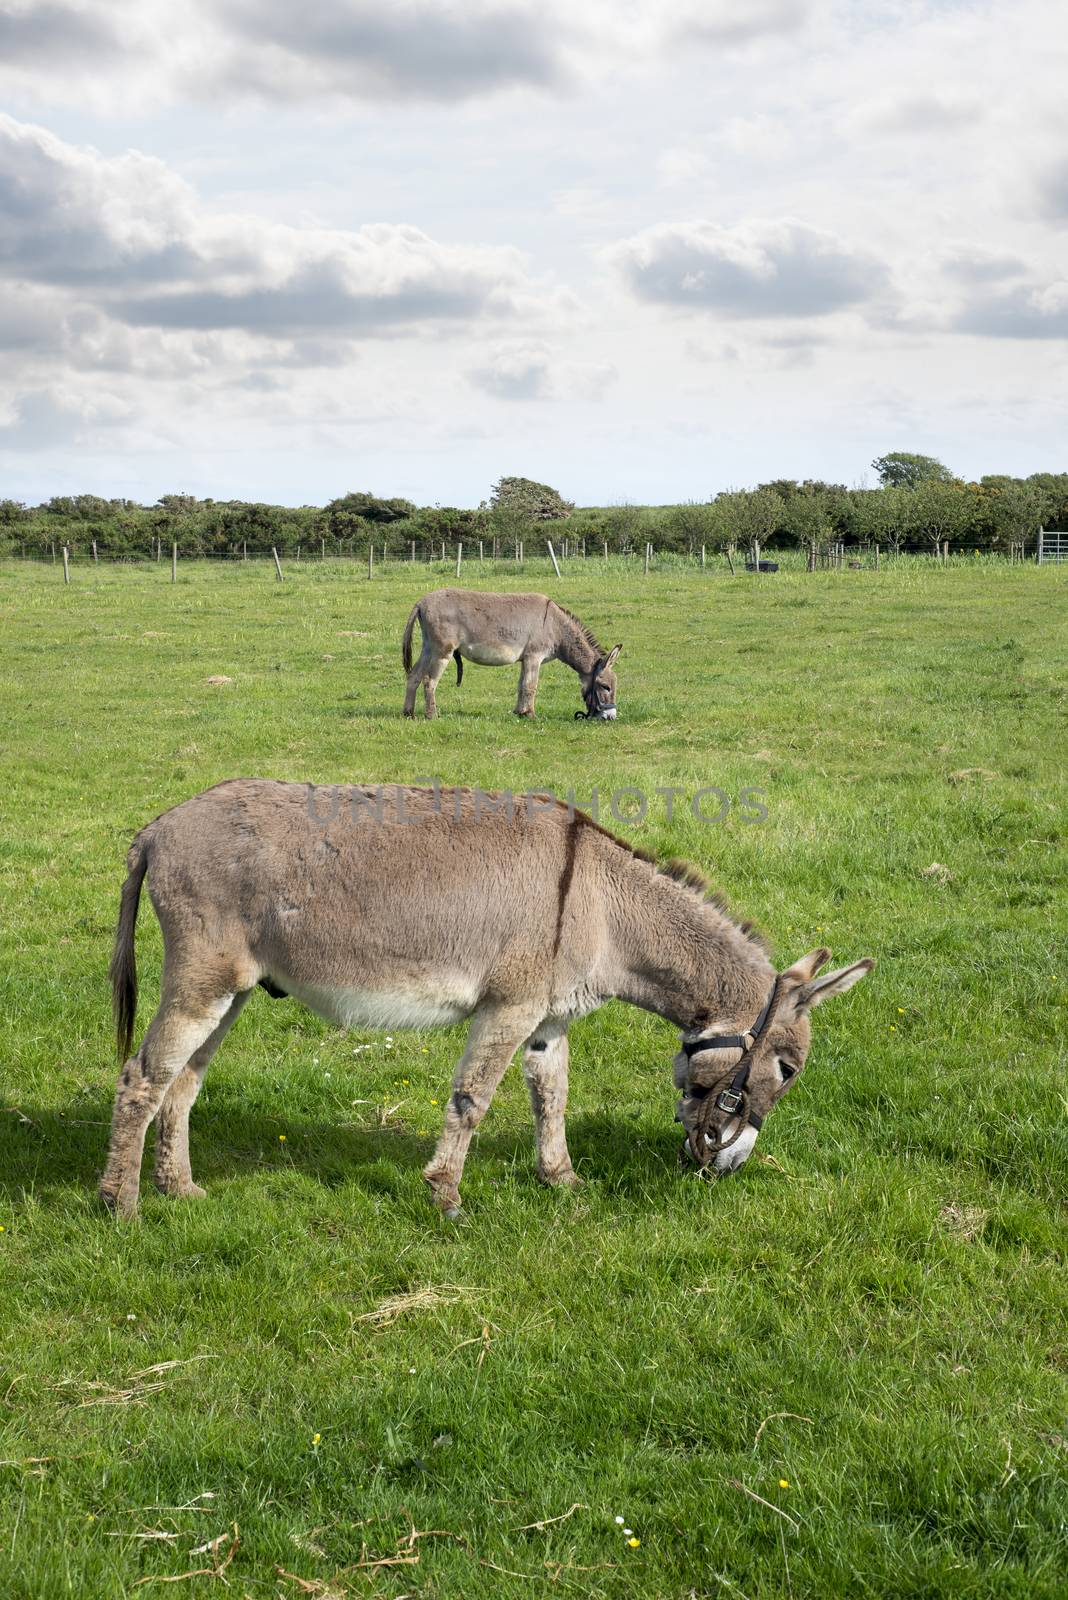 two donkeys grazing in a field at county kerry ireland